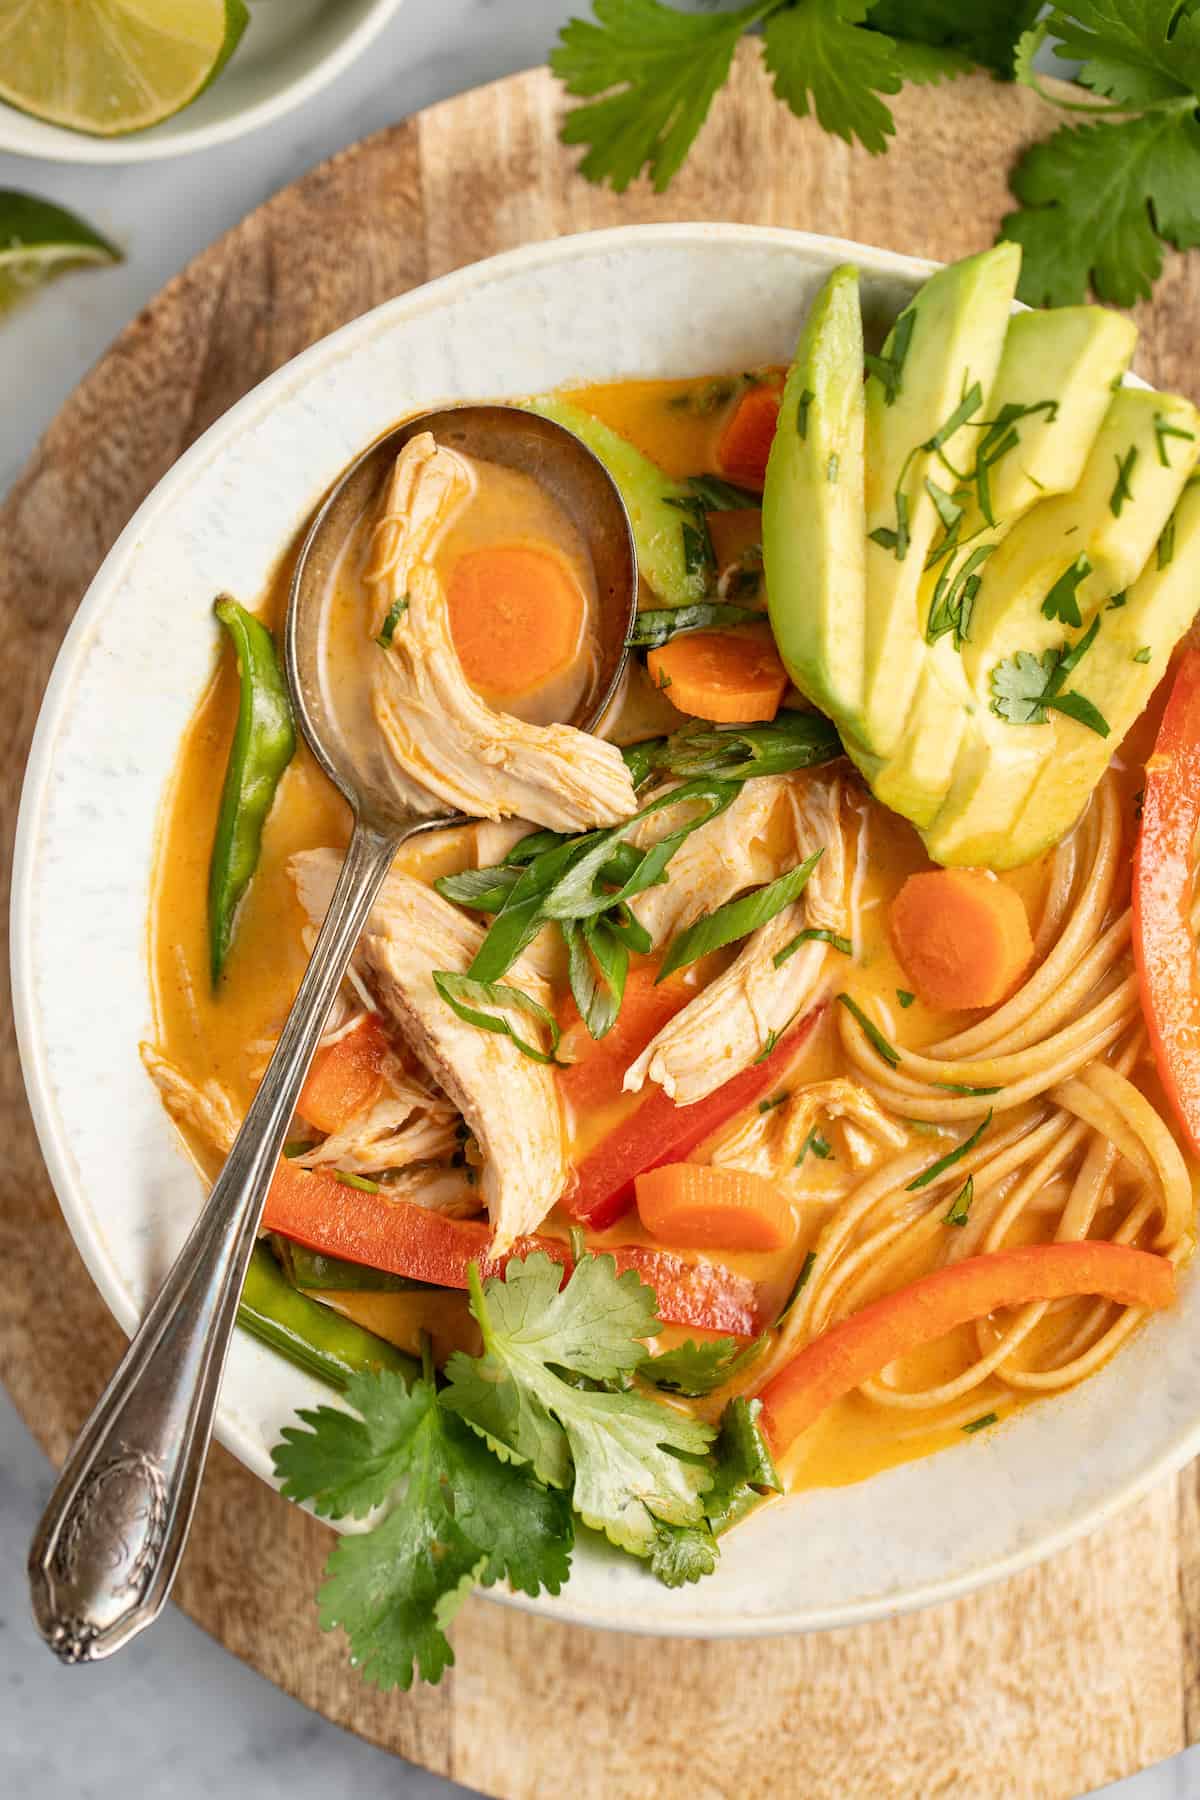 thai chicken noodle soup with an orange colored broth, rice noodles, avocados, and fresh herbs with a large metal s،